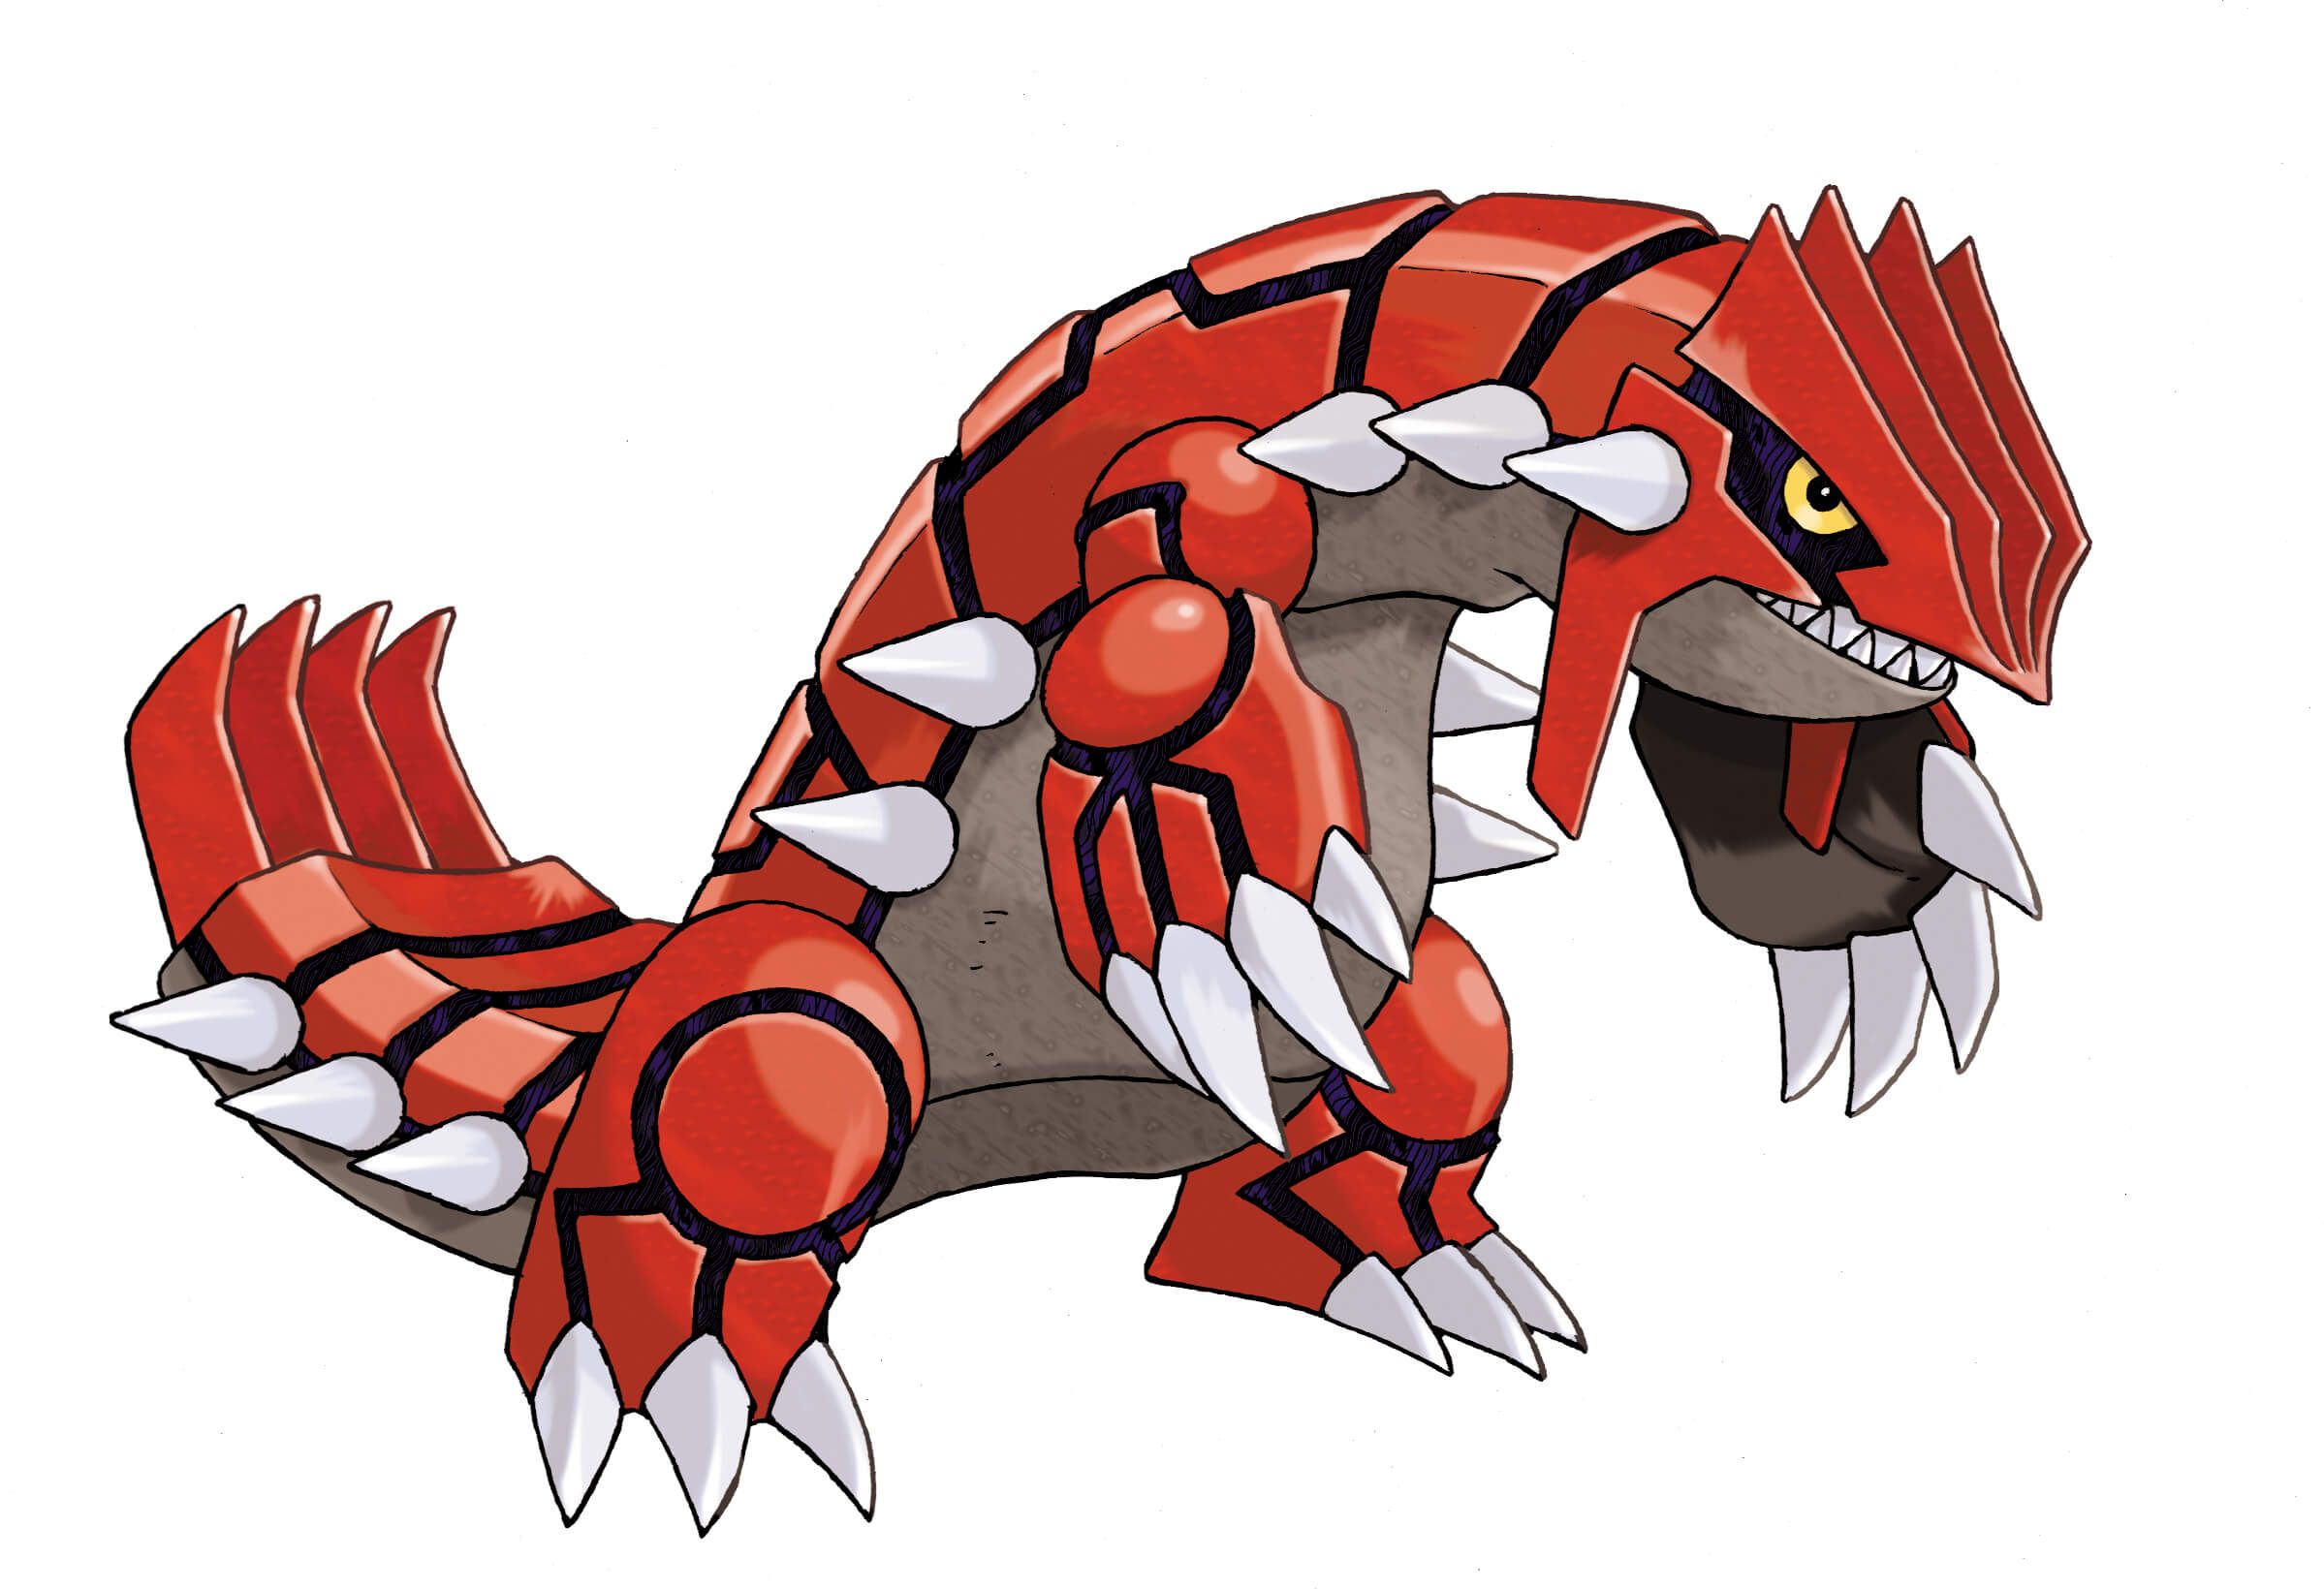 Pokemon Go Legendary Week Offers A Chance To Catch Groudon And More -  GameSpot